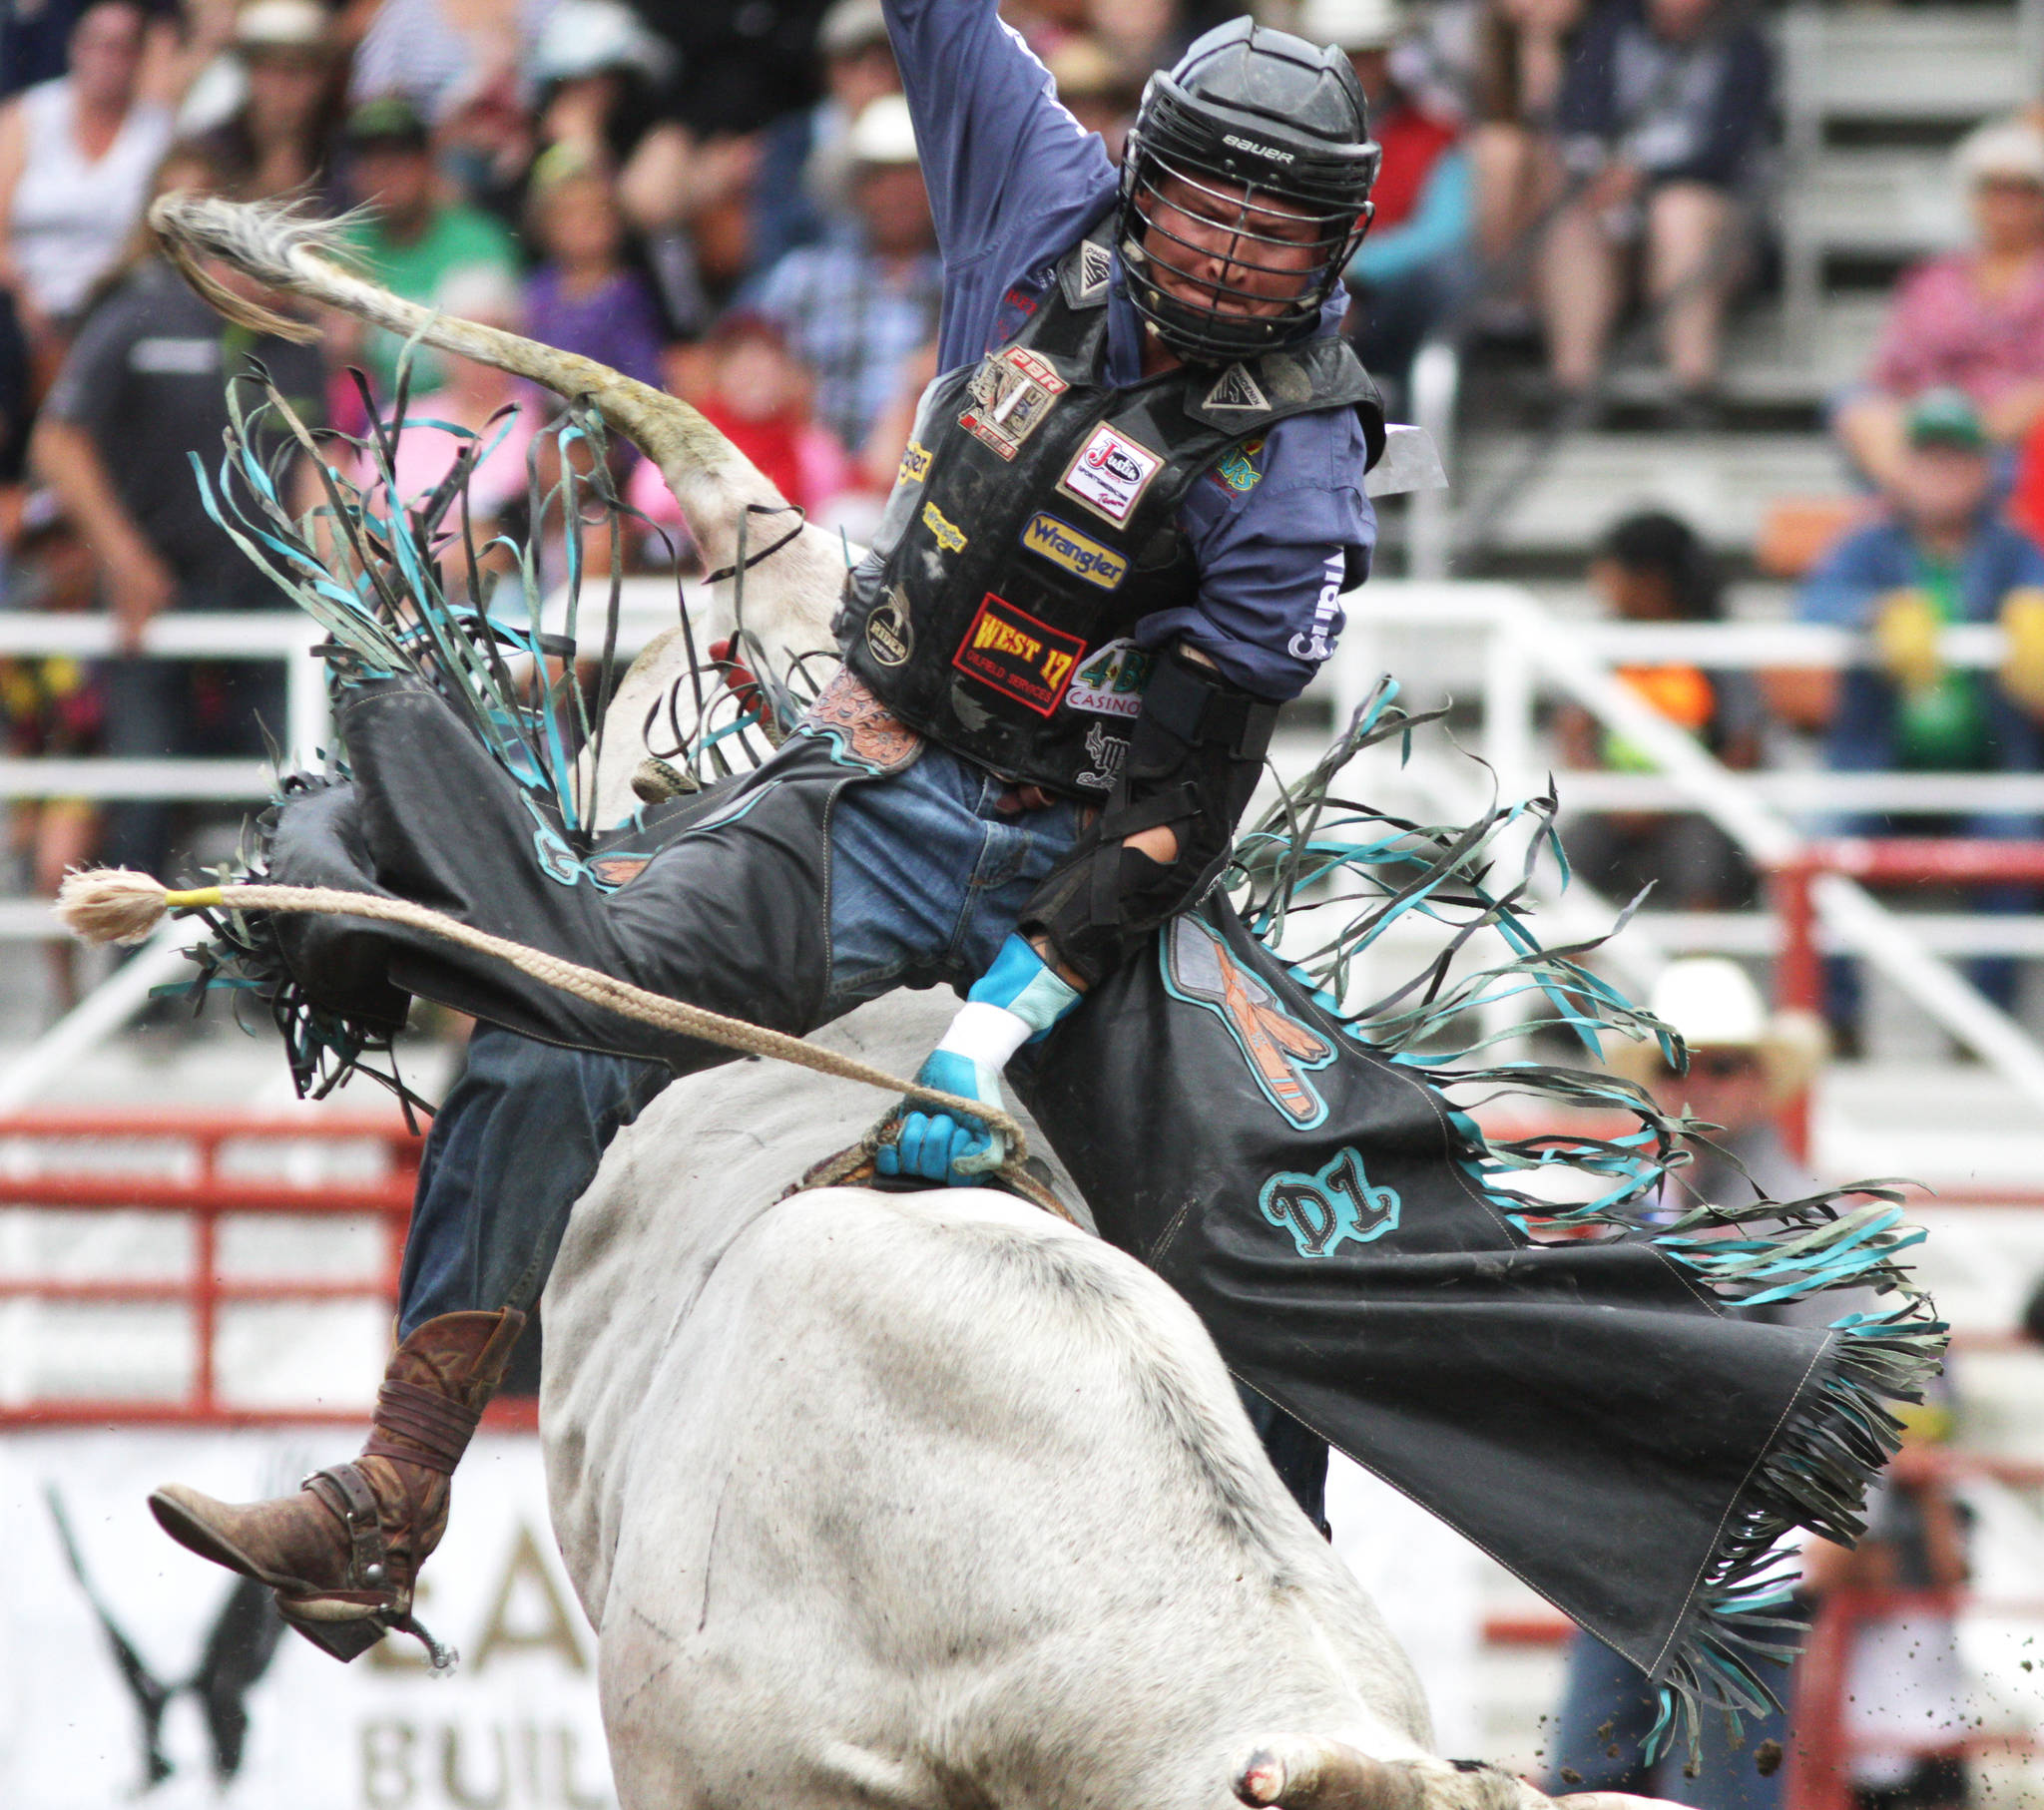 Bull rider Dakota Louis from Browning MT makes a solid eight seconds on Early Departure Friday afternoon. Louis scored 83.50 securing the eighth spot. After Friday’s performance there were only eight bull riders who stayed on for the full eight seconds.